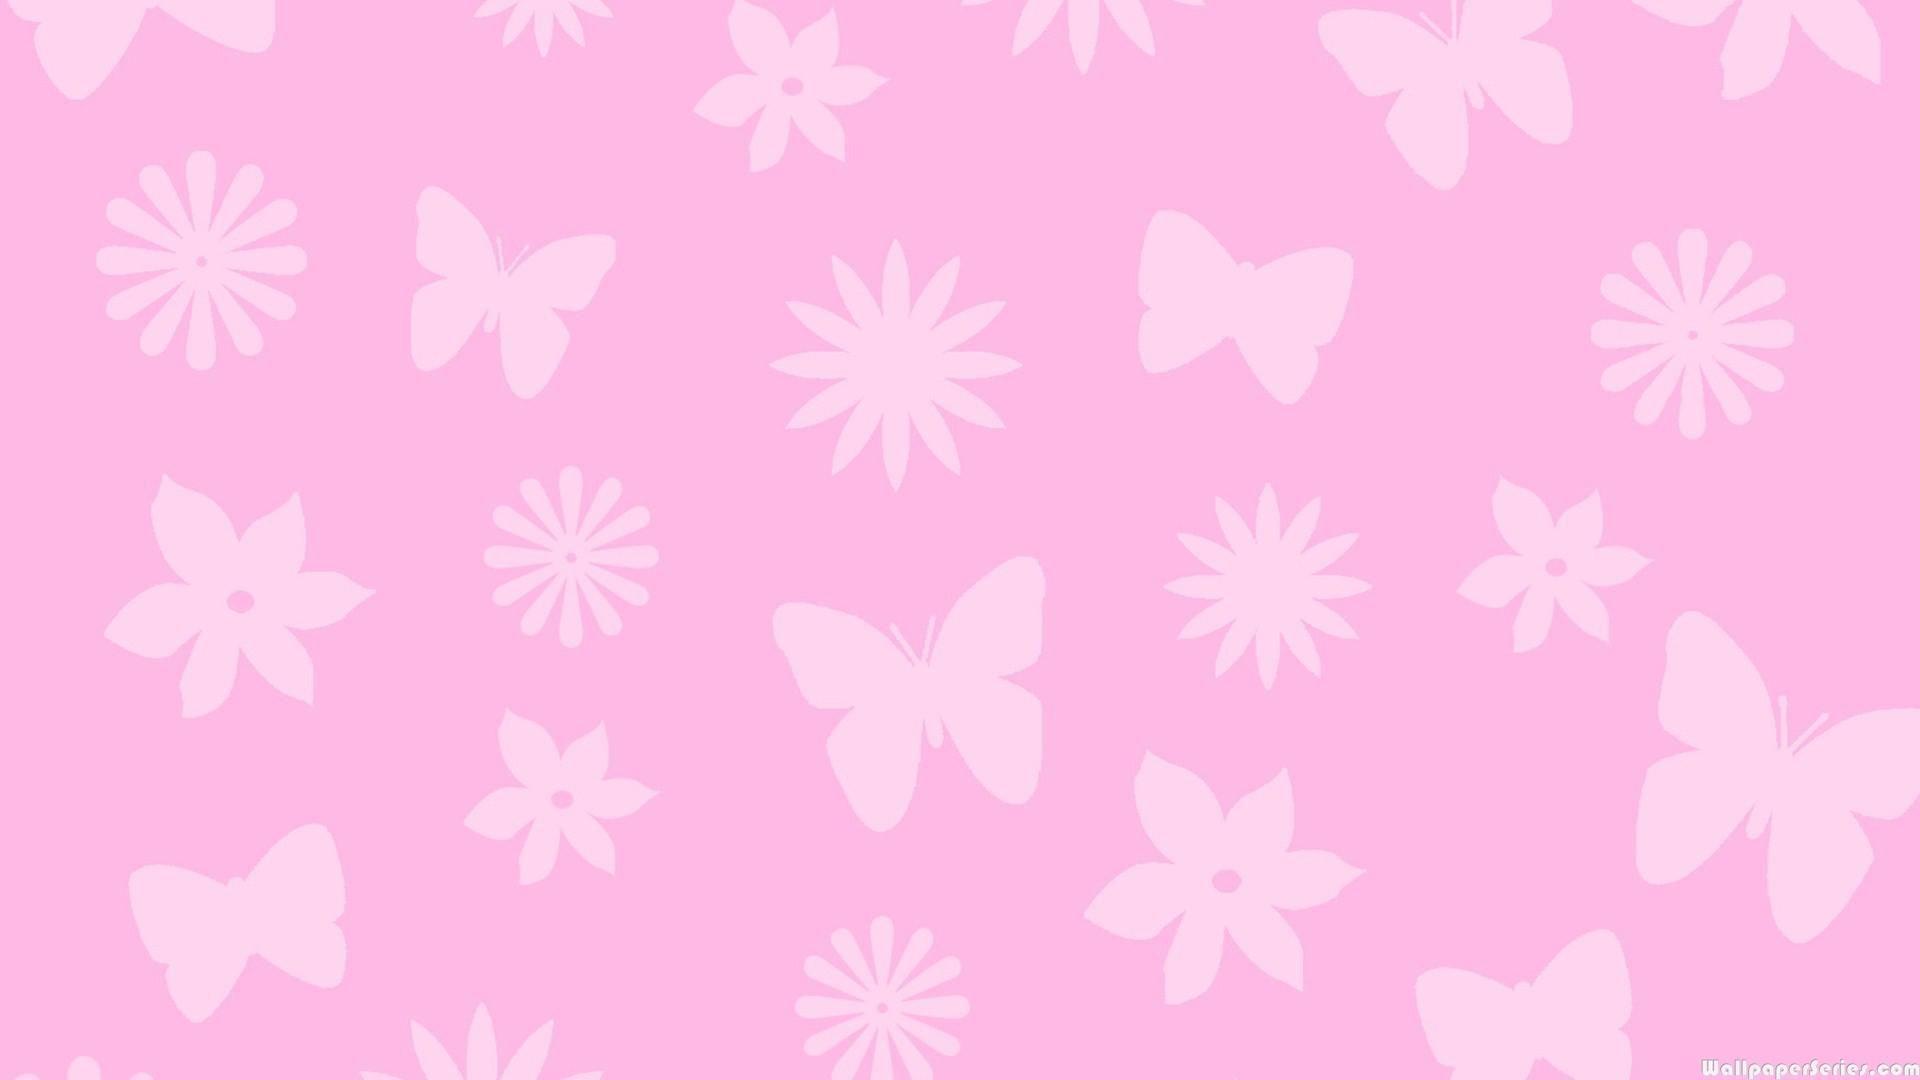 High Definition Pink Wallpaper Background For Free Download